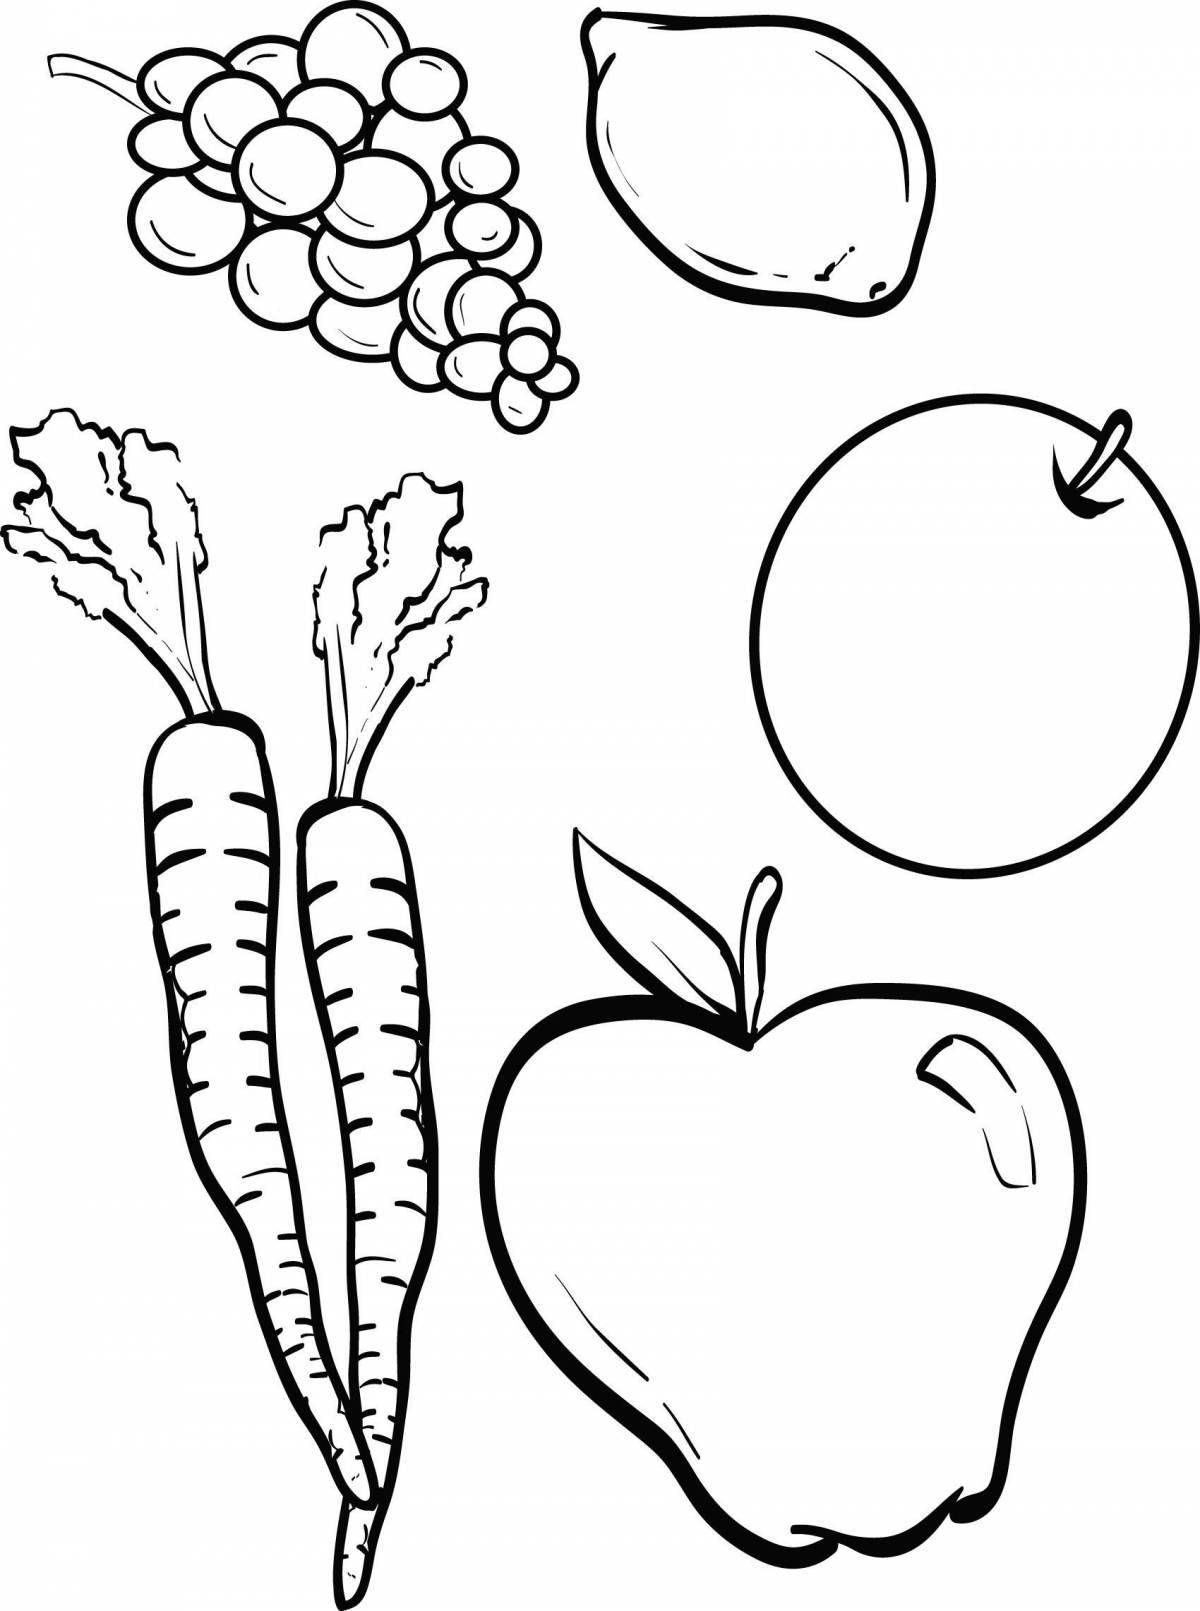 Joyful vegetable coloring book for 3 year olds